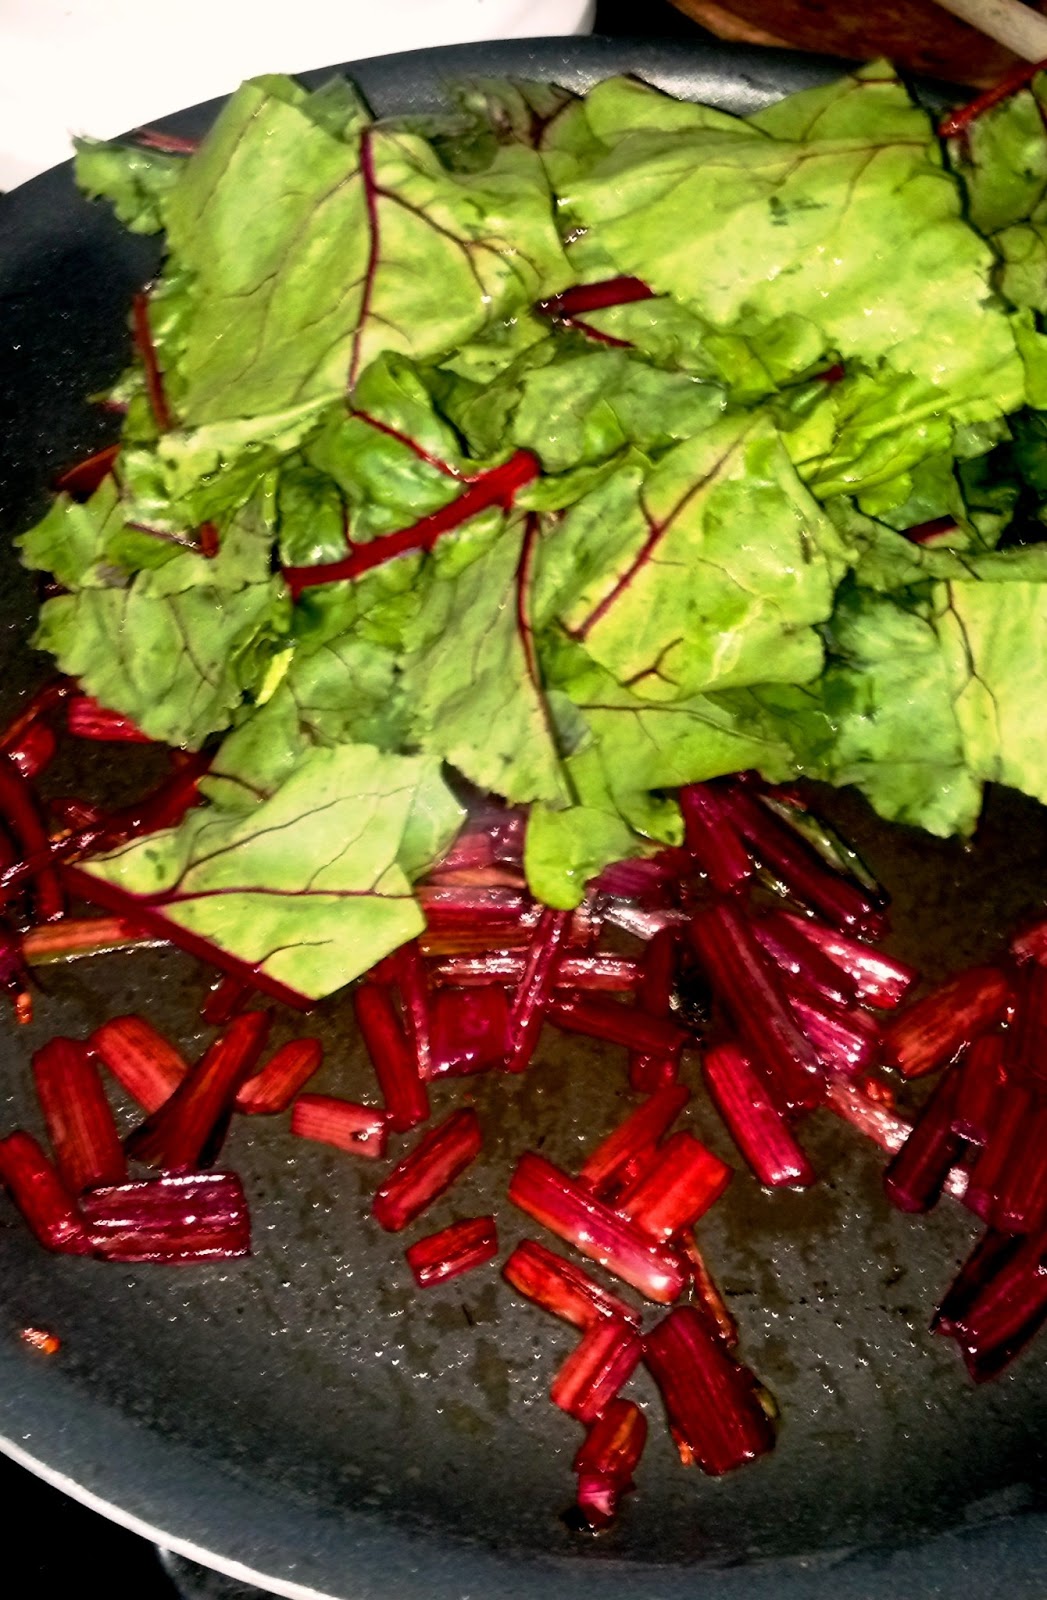 The Trim Tart: How to wash and cook Beet Greens (Sauteed Beet Green recipe)